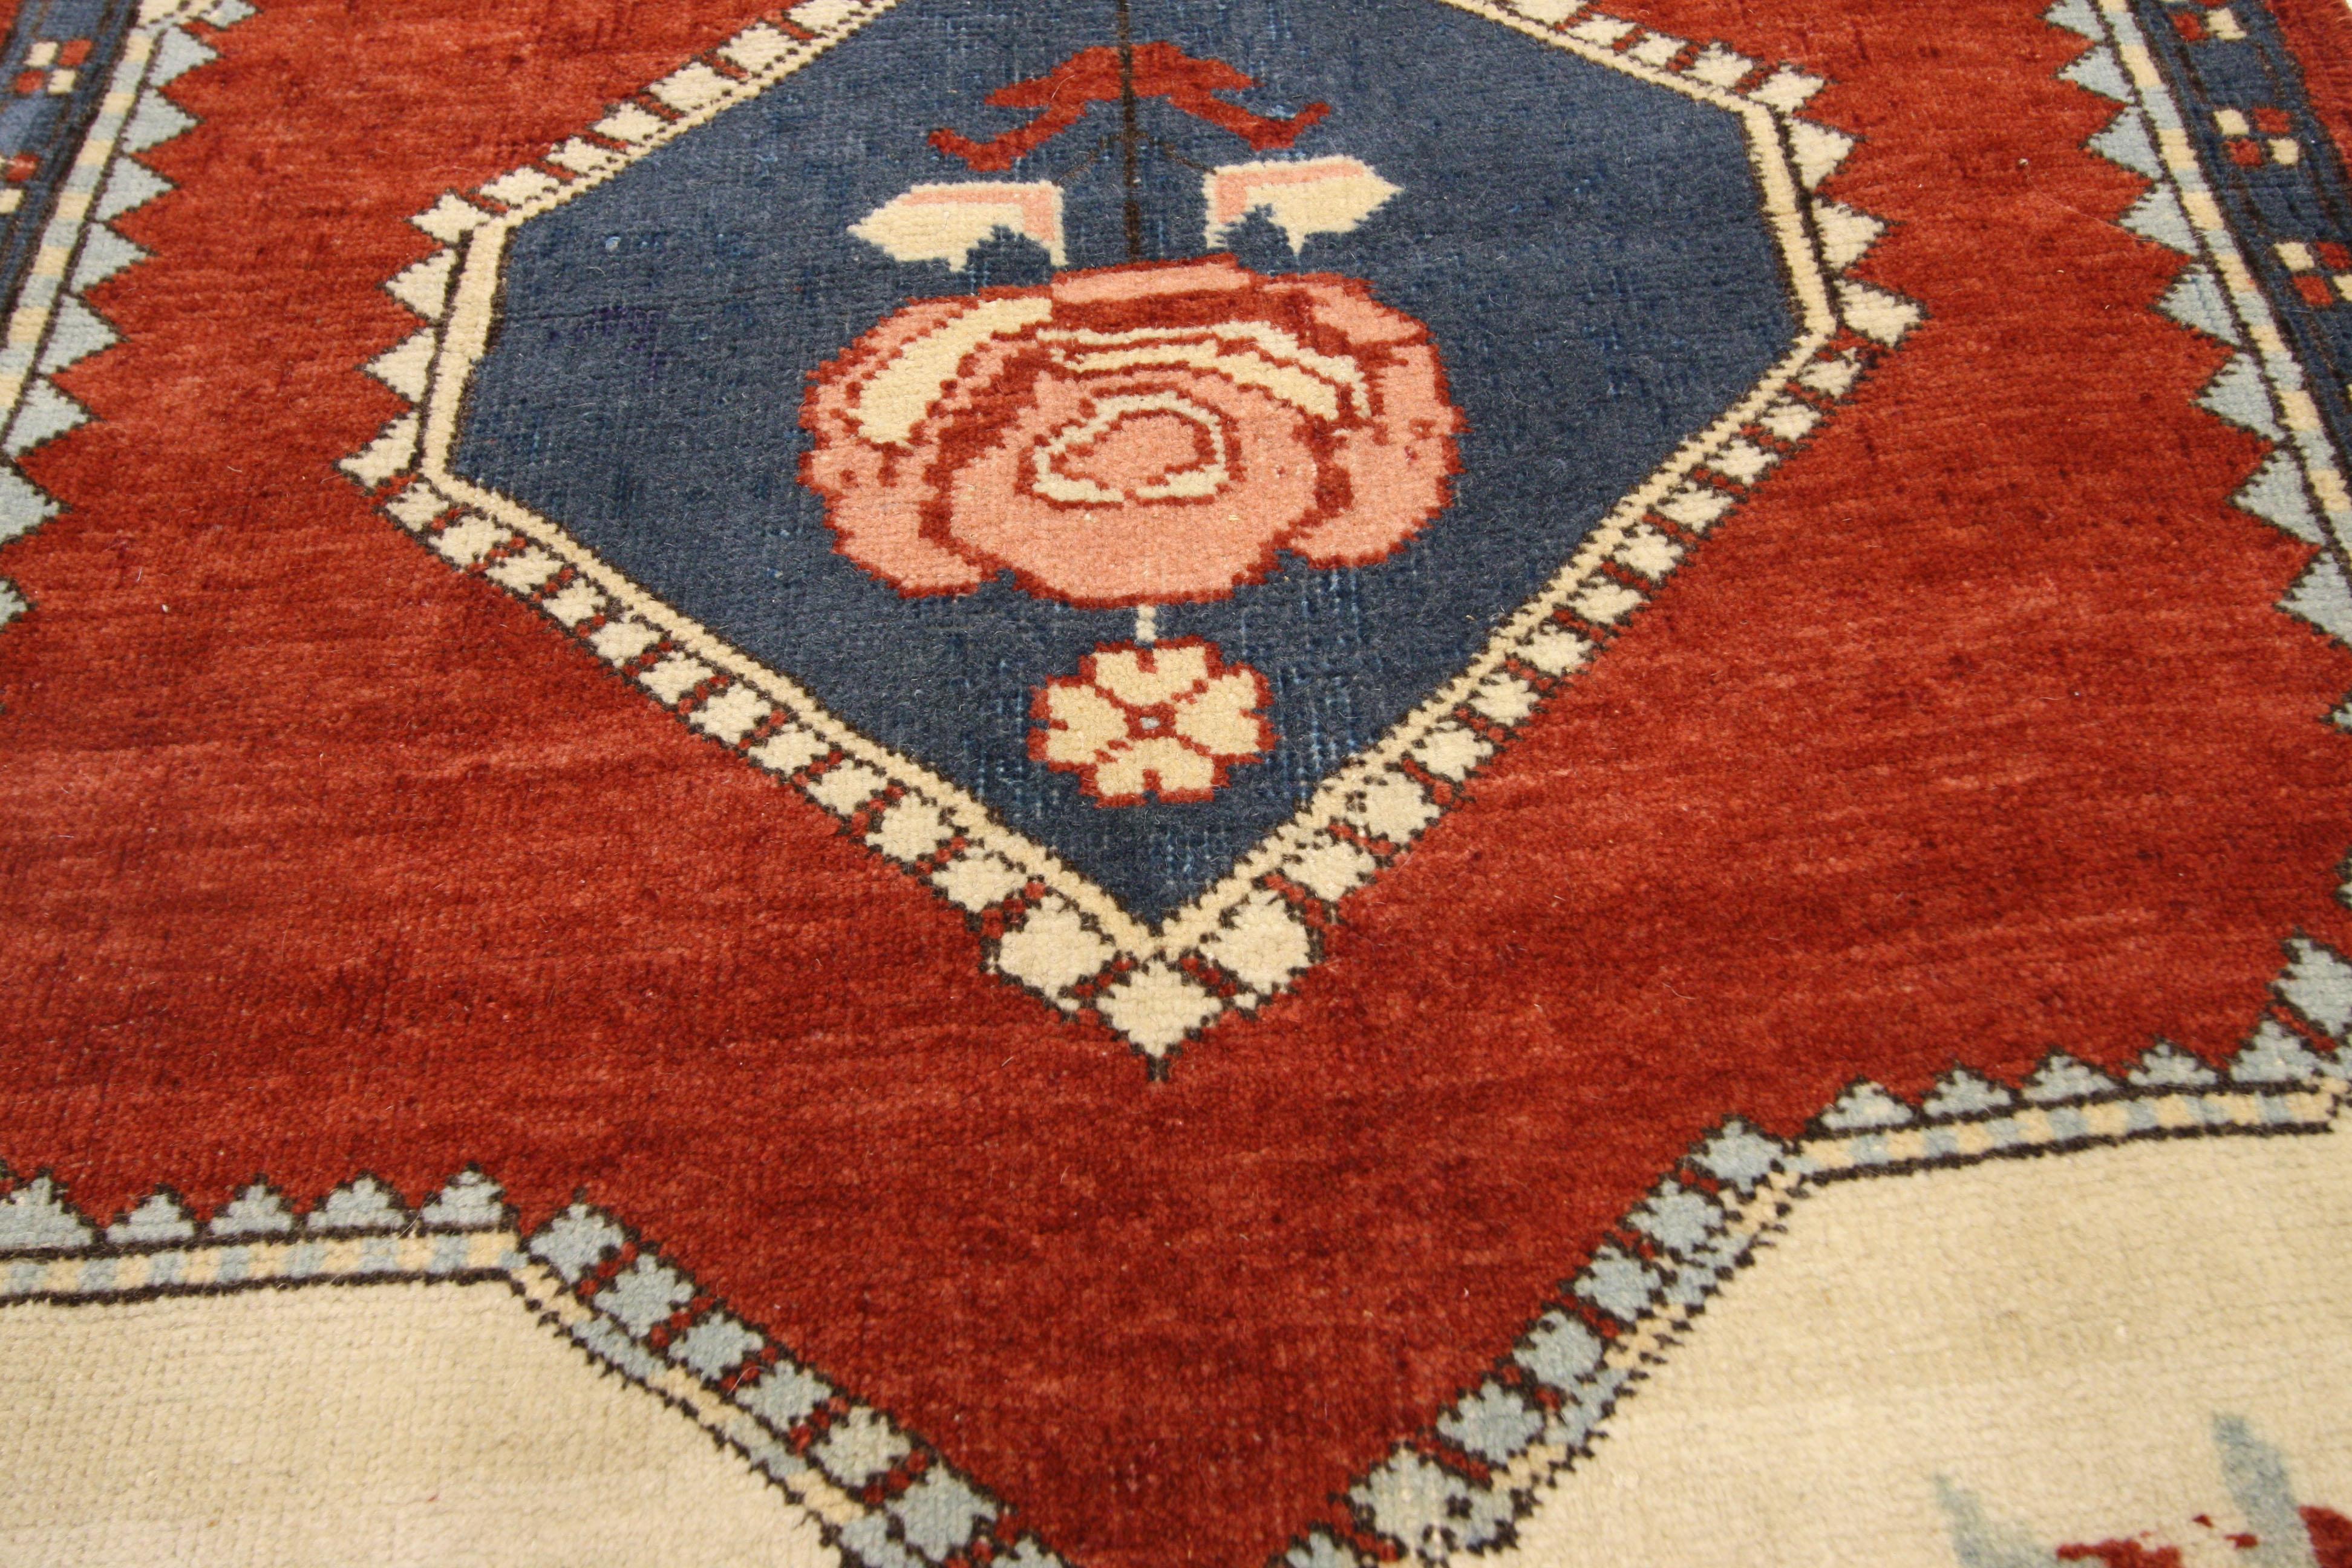 52422 Vintage Turkish Oushak rug with Jacobean style. Character and charm collide in this beautiful Turkish Oushak rug with Jacobean style. This vintage Oushak rug is unique among its kind, boasting an extraordinarily delightful composition. A